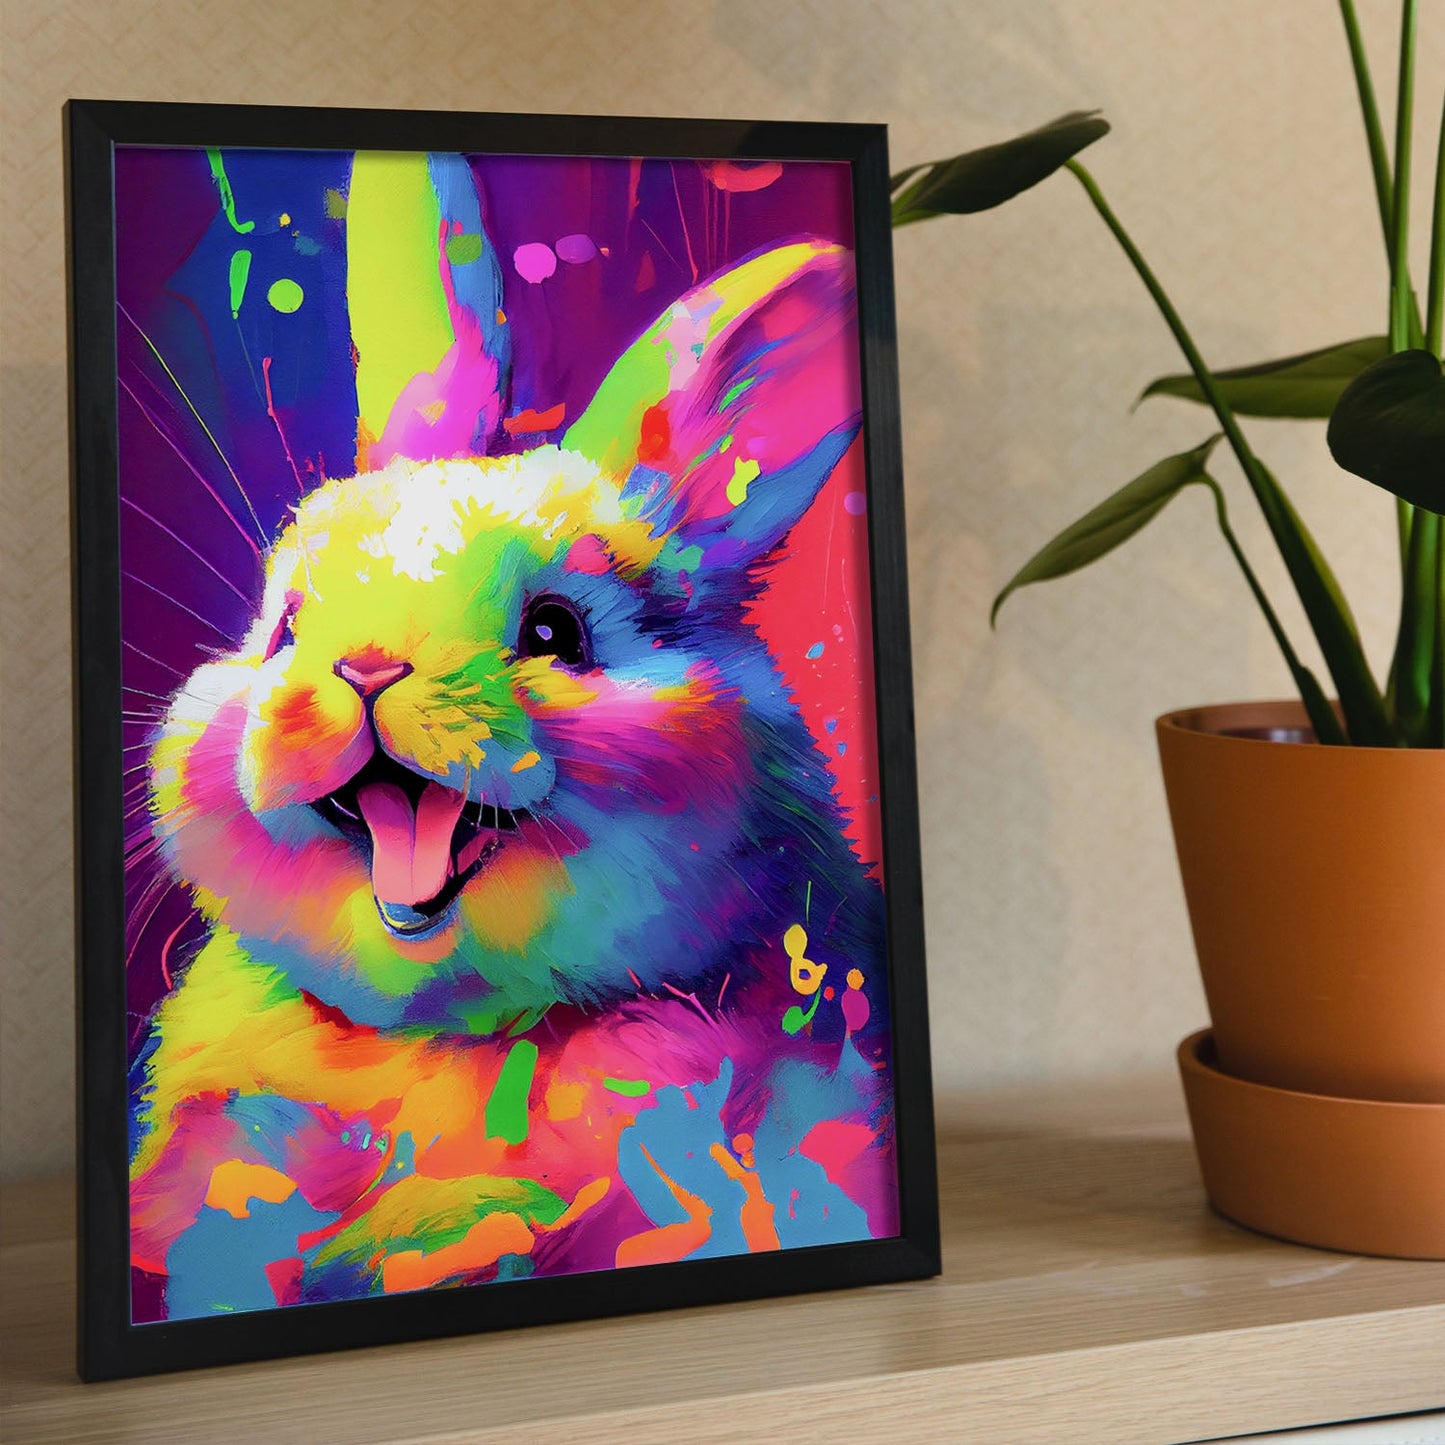 Nacnic Abstract smiling Bunny in Lisa Fran Style. Aesthetic Wall Art Prints for Bedroom or Living Room Design.